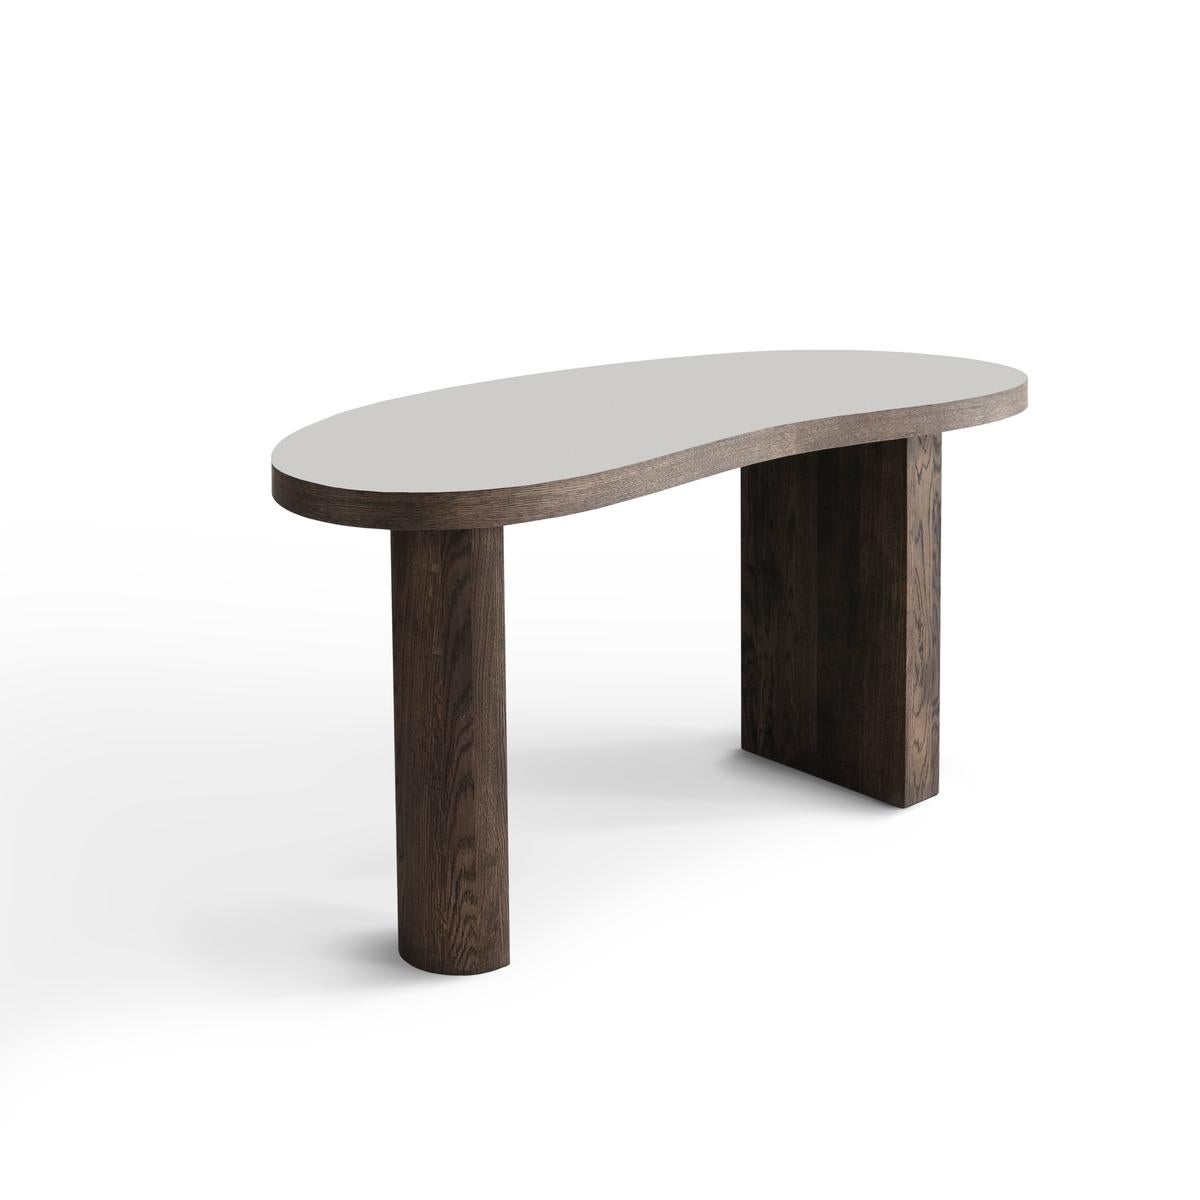 Contemporary Desk Table 'Ms Bean', Smoked Oak, White Tabletop In New Condition For Sale In Paris, FR